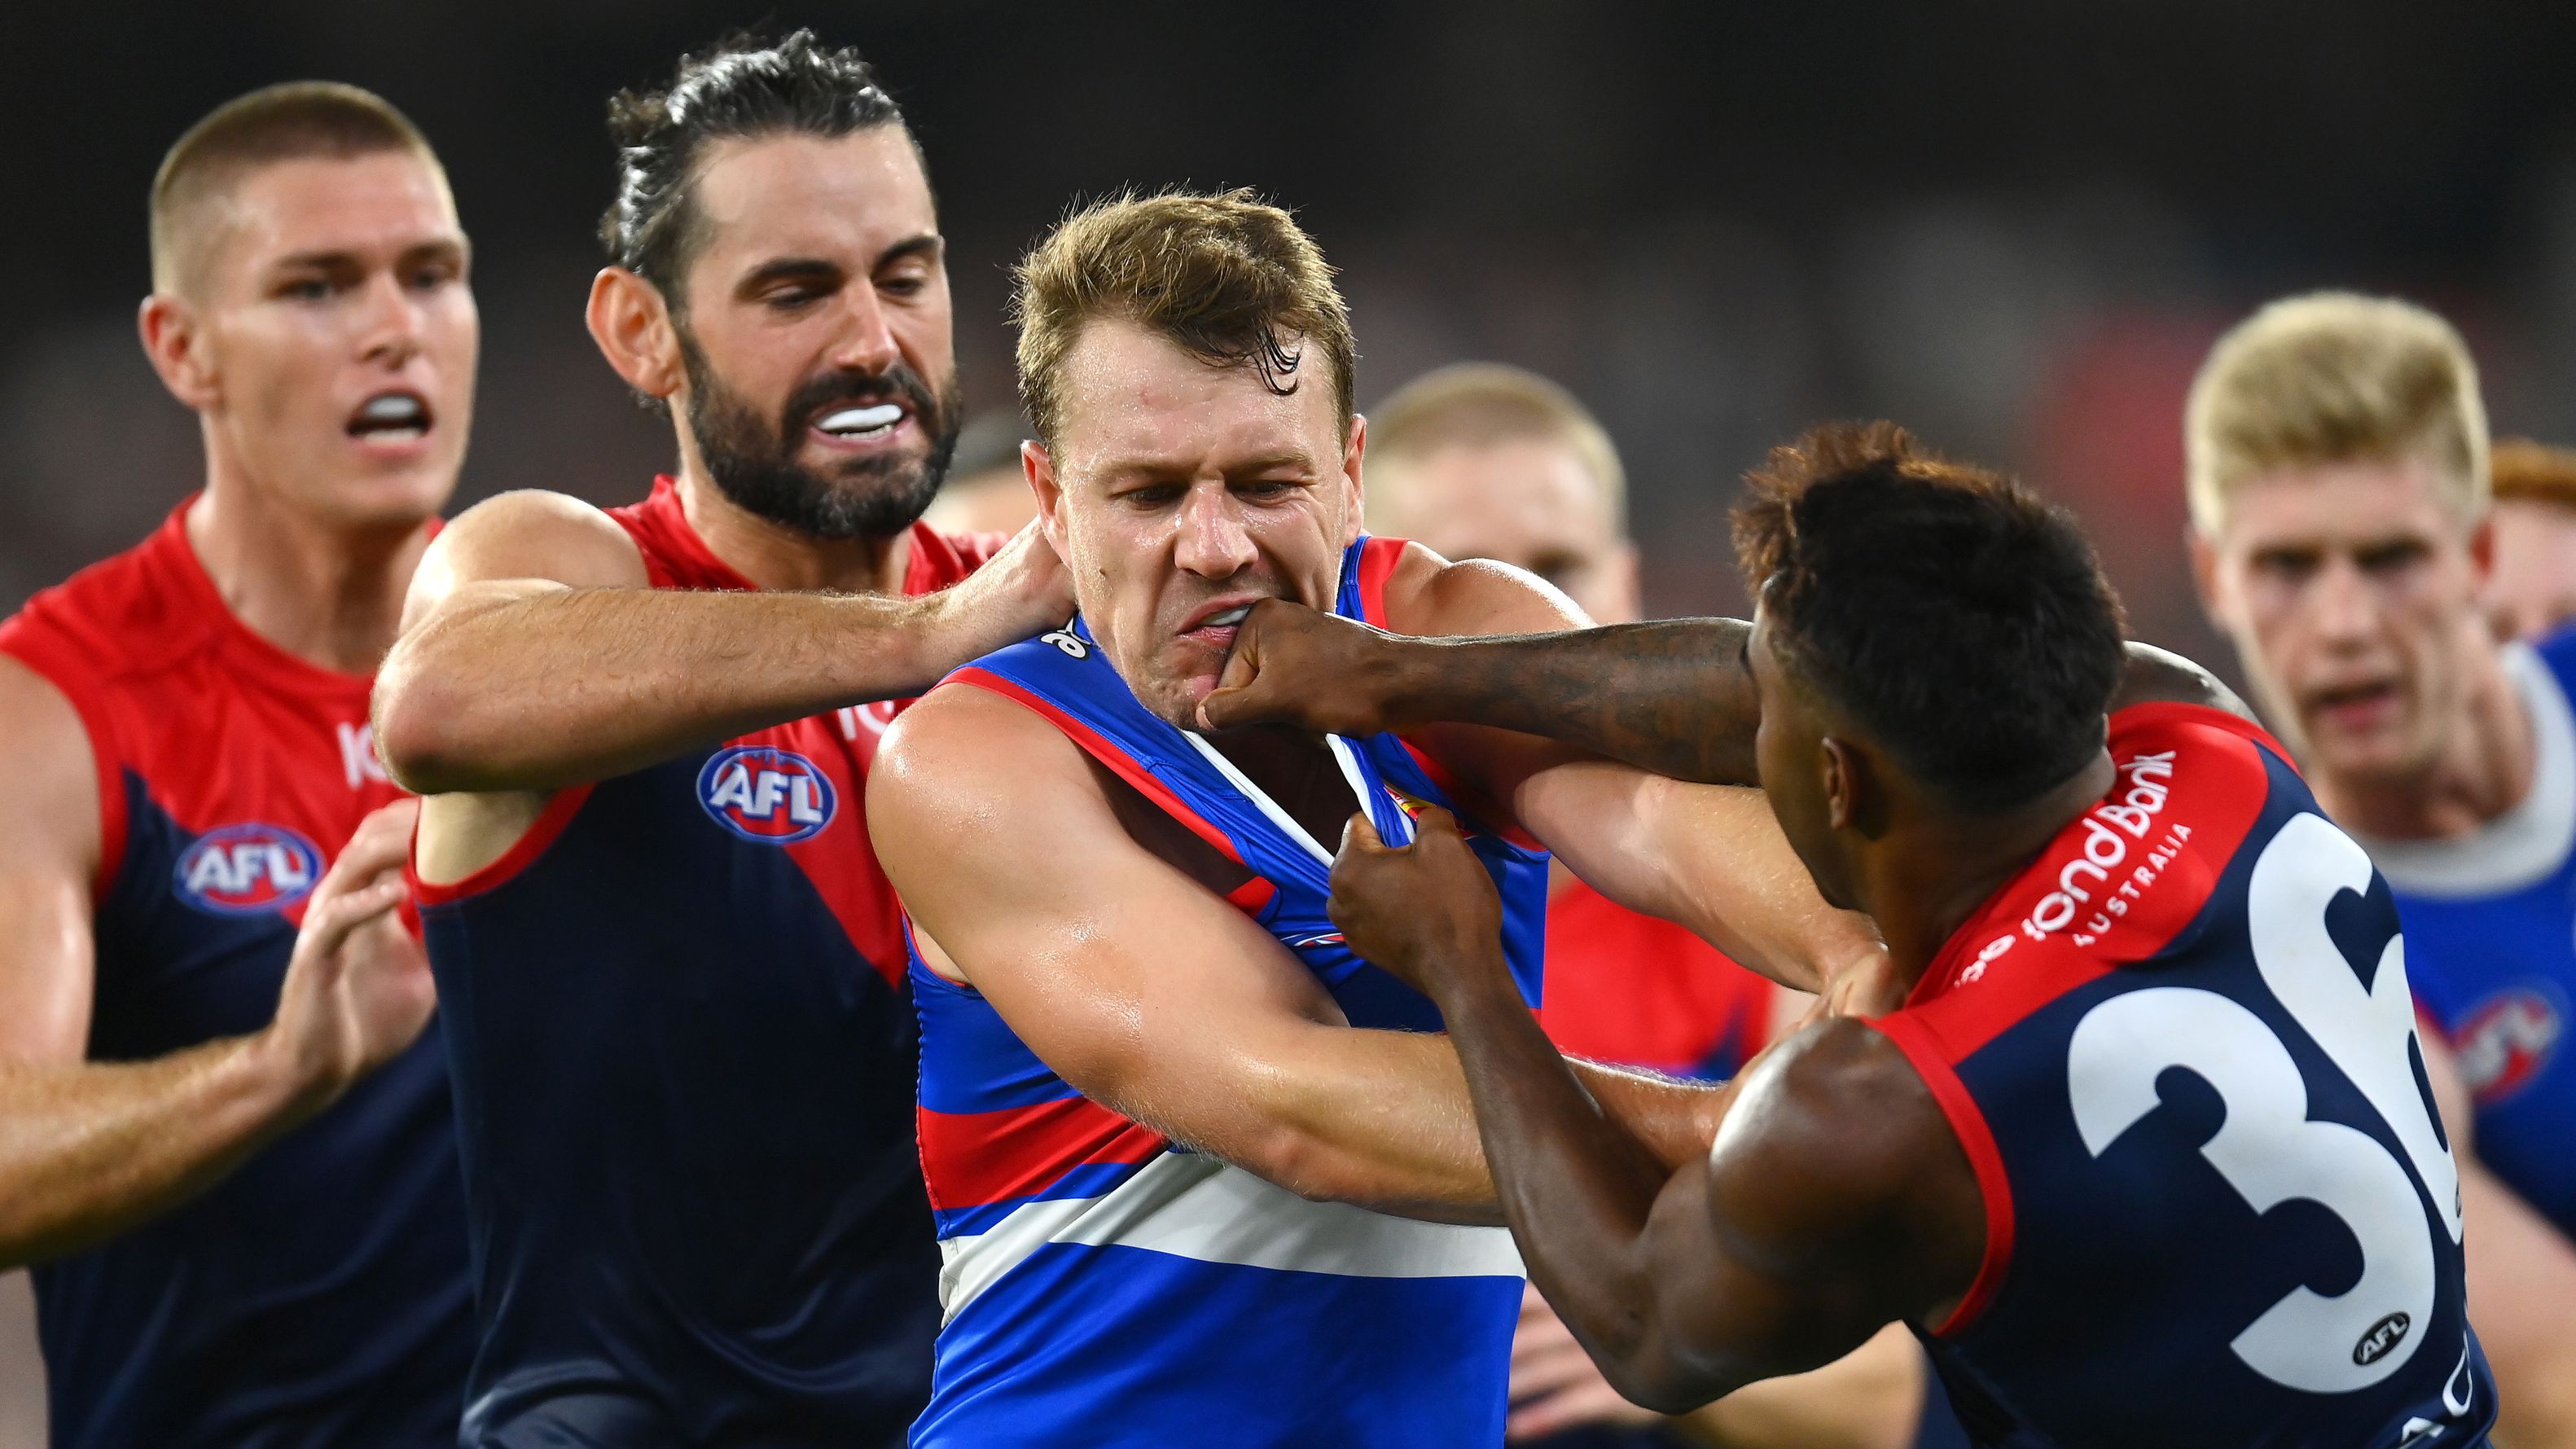 MELBOURNE, AUSTRALIA - MARCH 18: Jackson Macrae of the Bulldogs remonstrates with Kysaiah Pickett of the Demons after a bump on  Bailey Smith of the Bulldogs during the round one AFL match between Melbourne Demons and Western Bulldogs at Melbourne Cricket Ground, on March 18, 2023, in Melbourne, Australia. (Photo by Quinn Rooney/Getty Images)